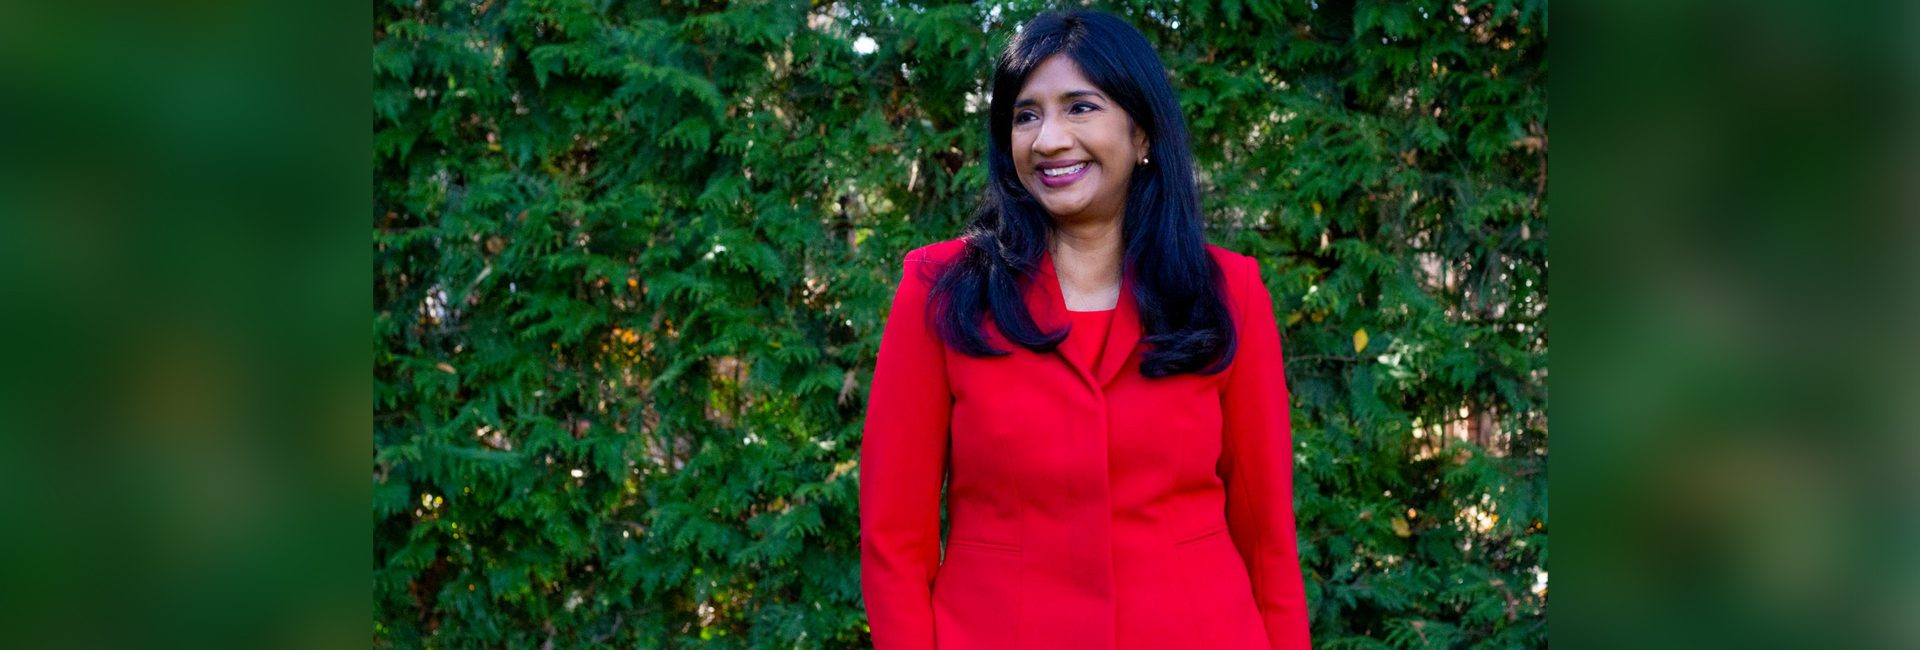 Indian American Aruna Miller on her way to being Maryland’s Lt. Governor